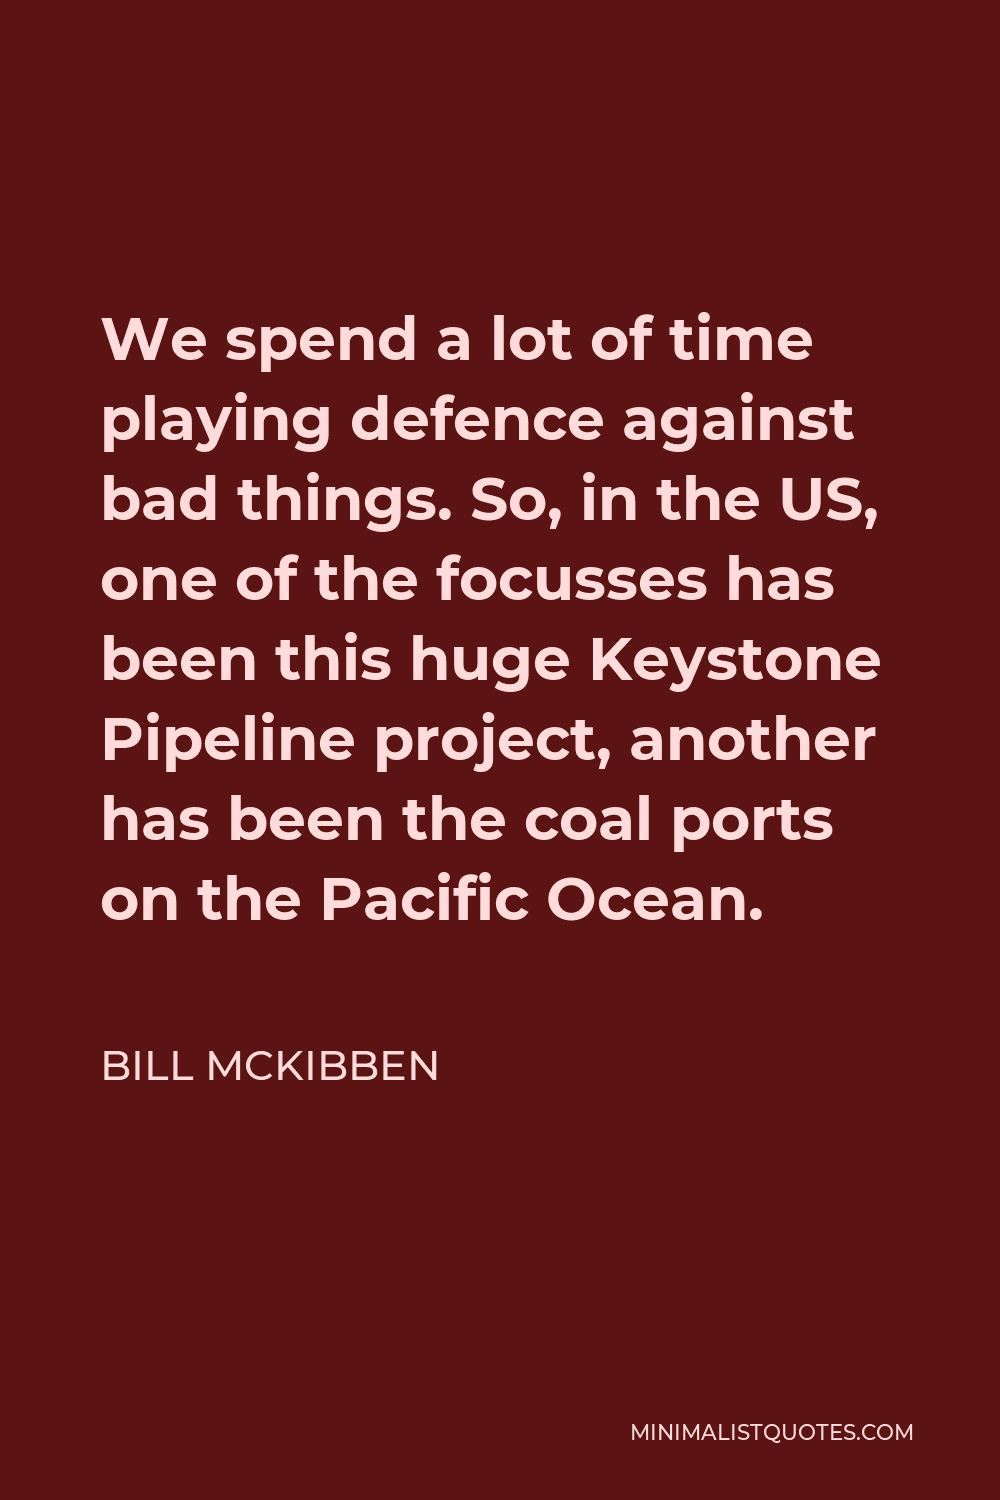 Bill McKibben Quote - We spend a lot of time playing defence against bad things. So, in the US, one of the focusses has been this huge Keystone Pipeline project, another has been the coal ports on the Pacific Ocean.